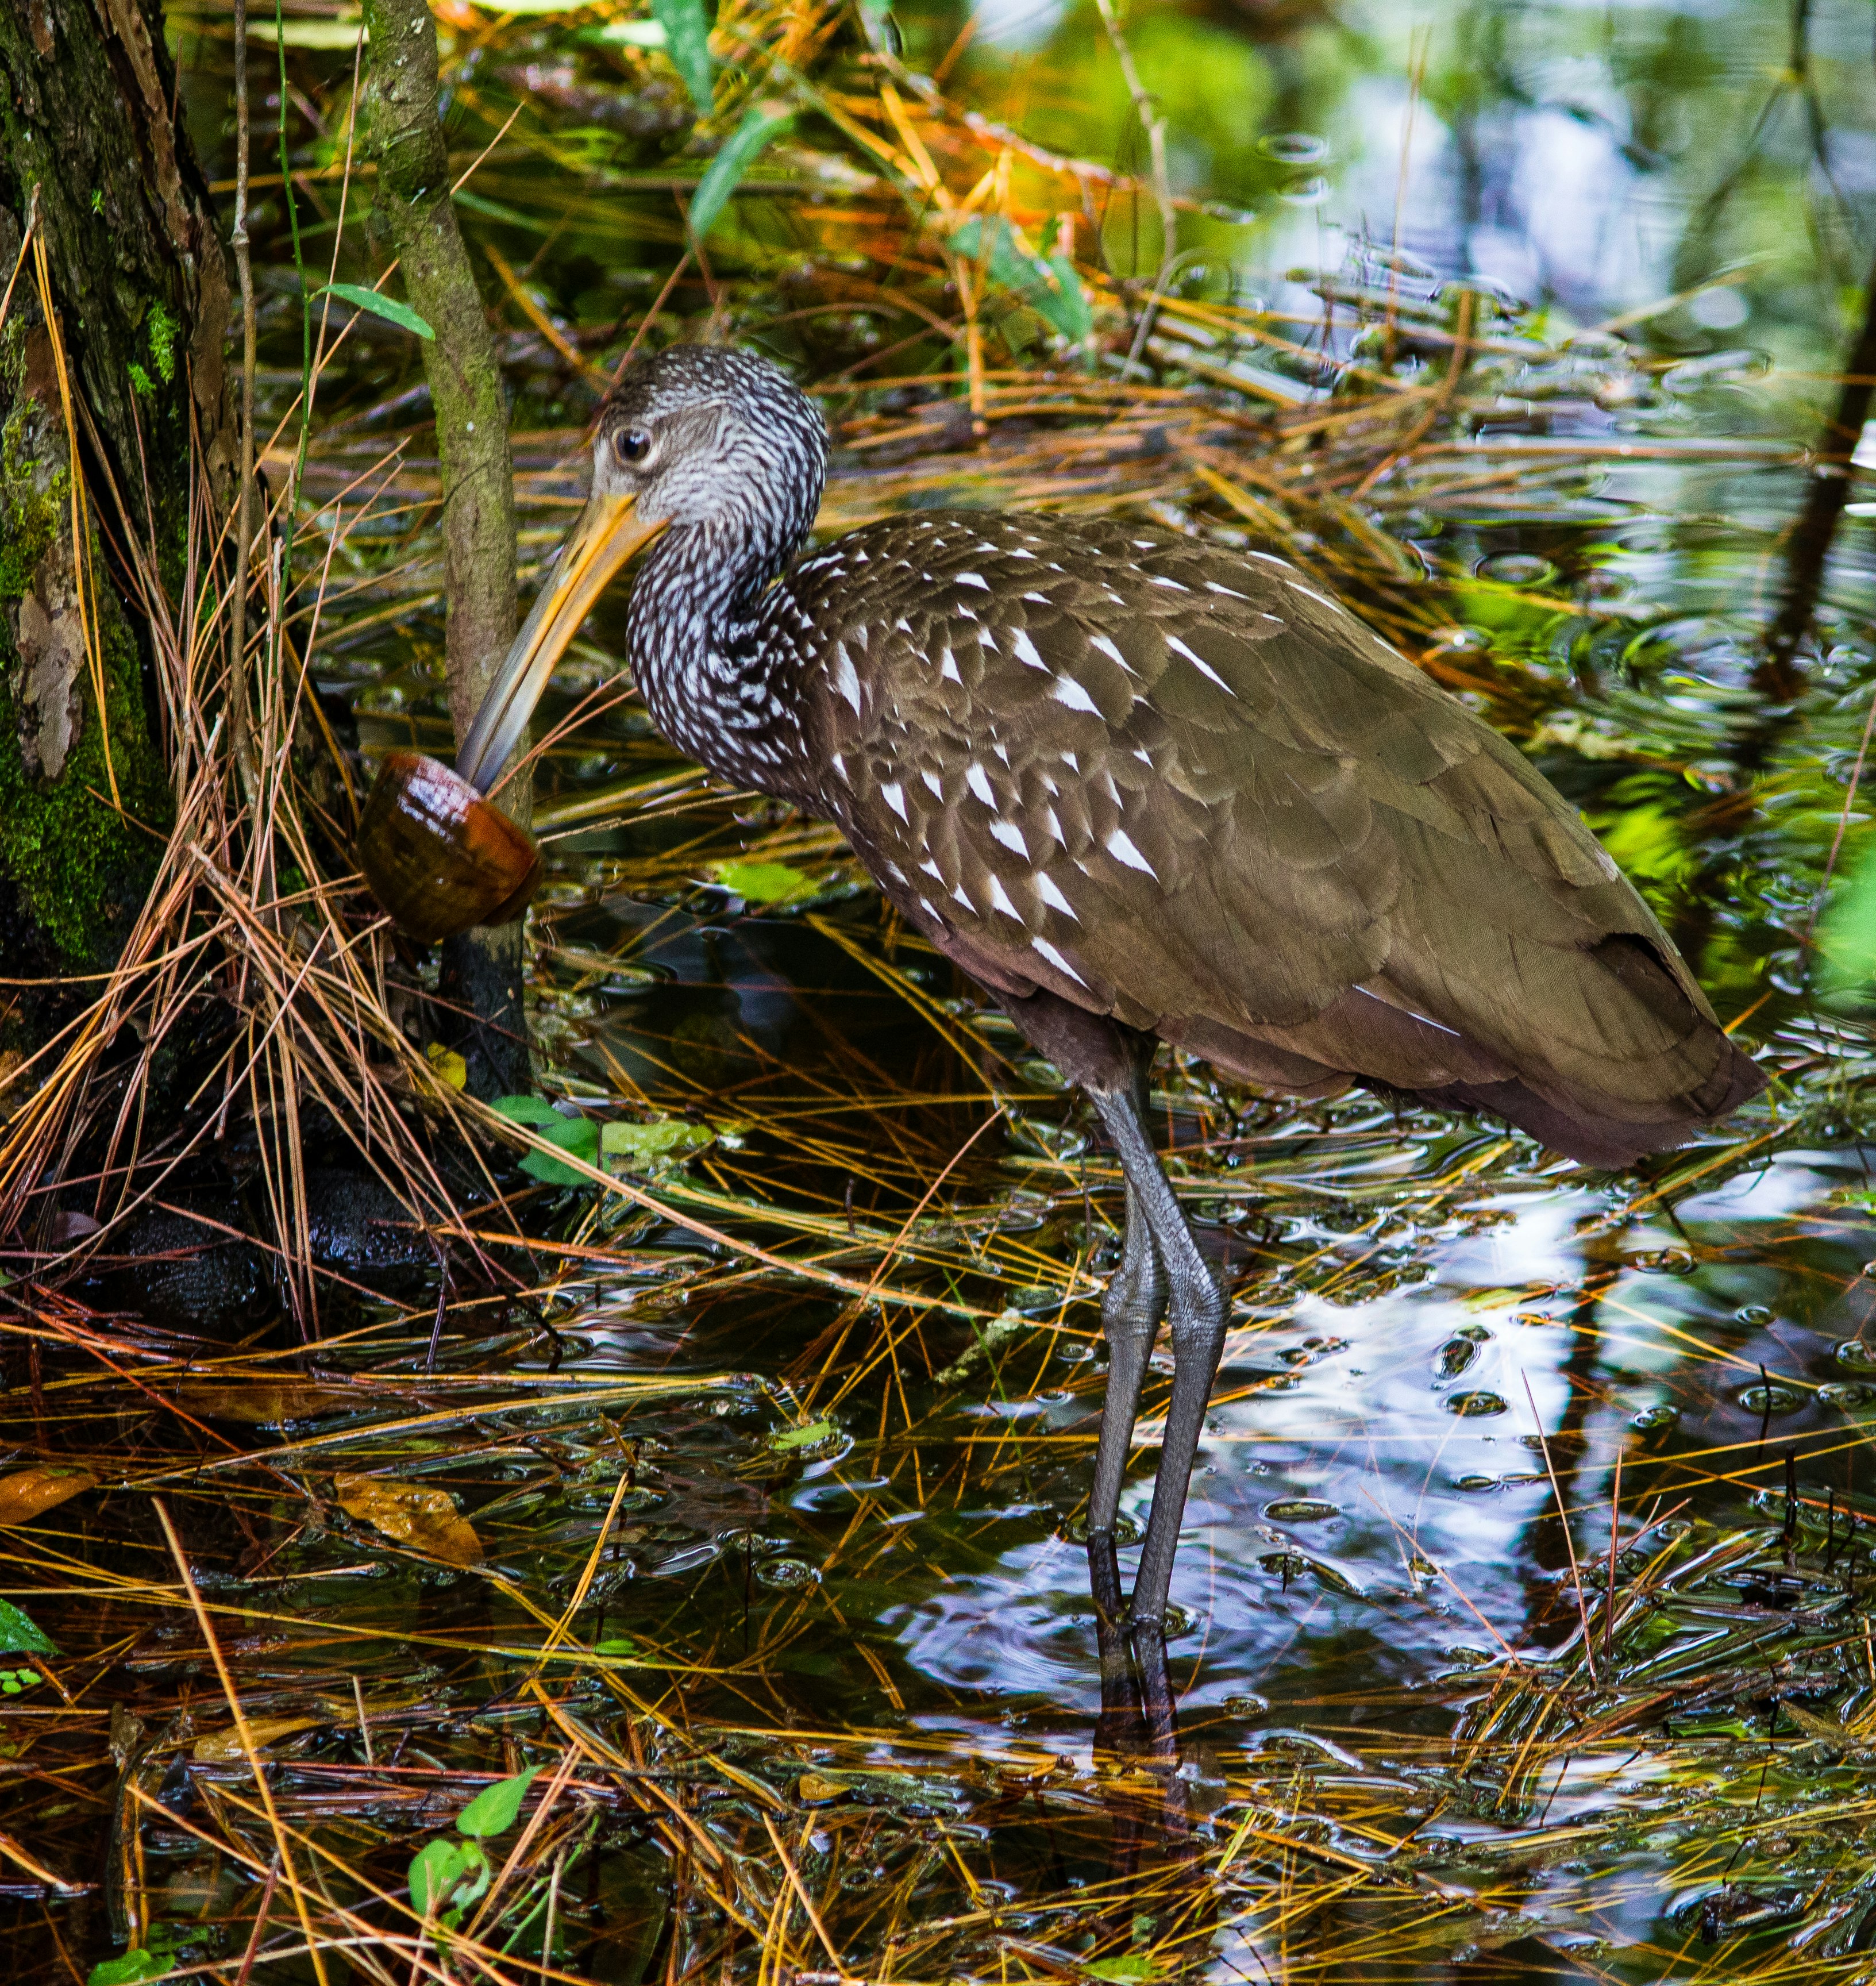 Limpkin with a large snail in a swamp